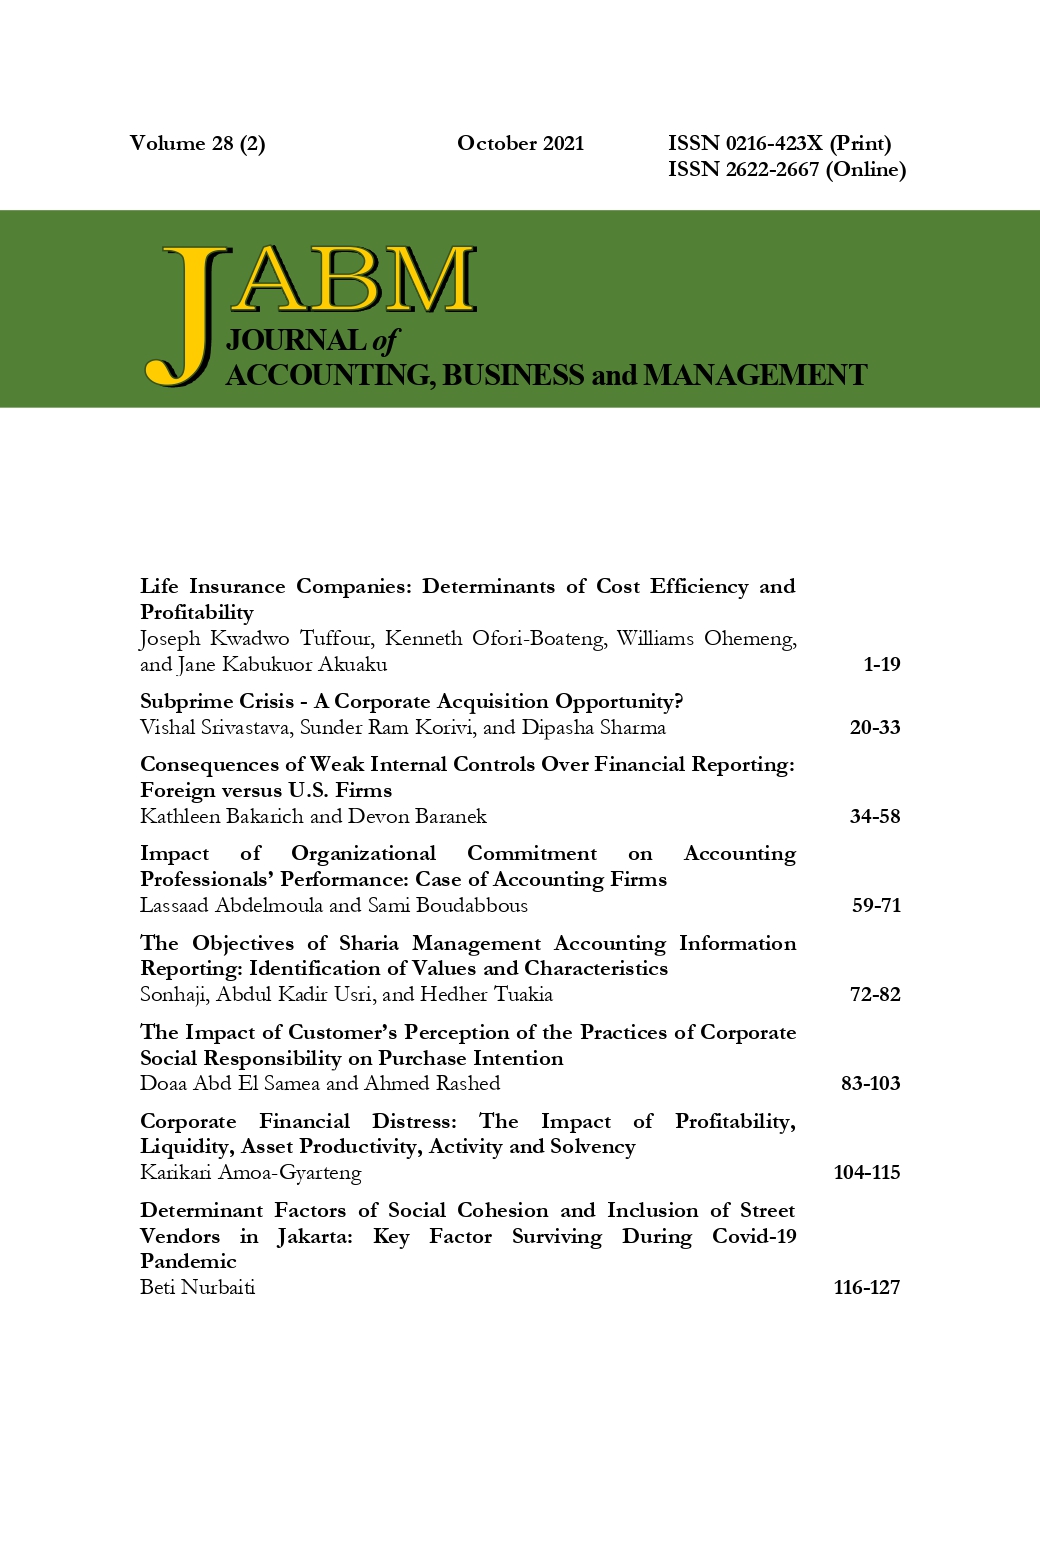 Journal of Accounting, Business and Management (JABM) vol. 28 no. 2 (2021)